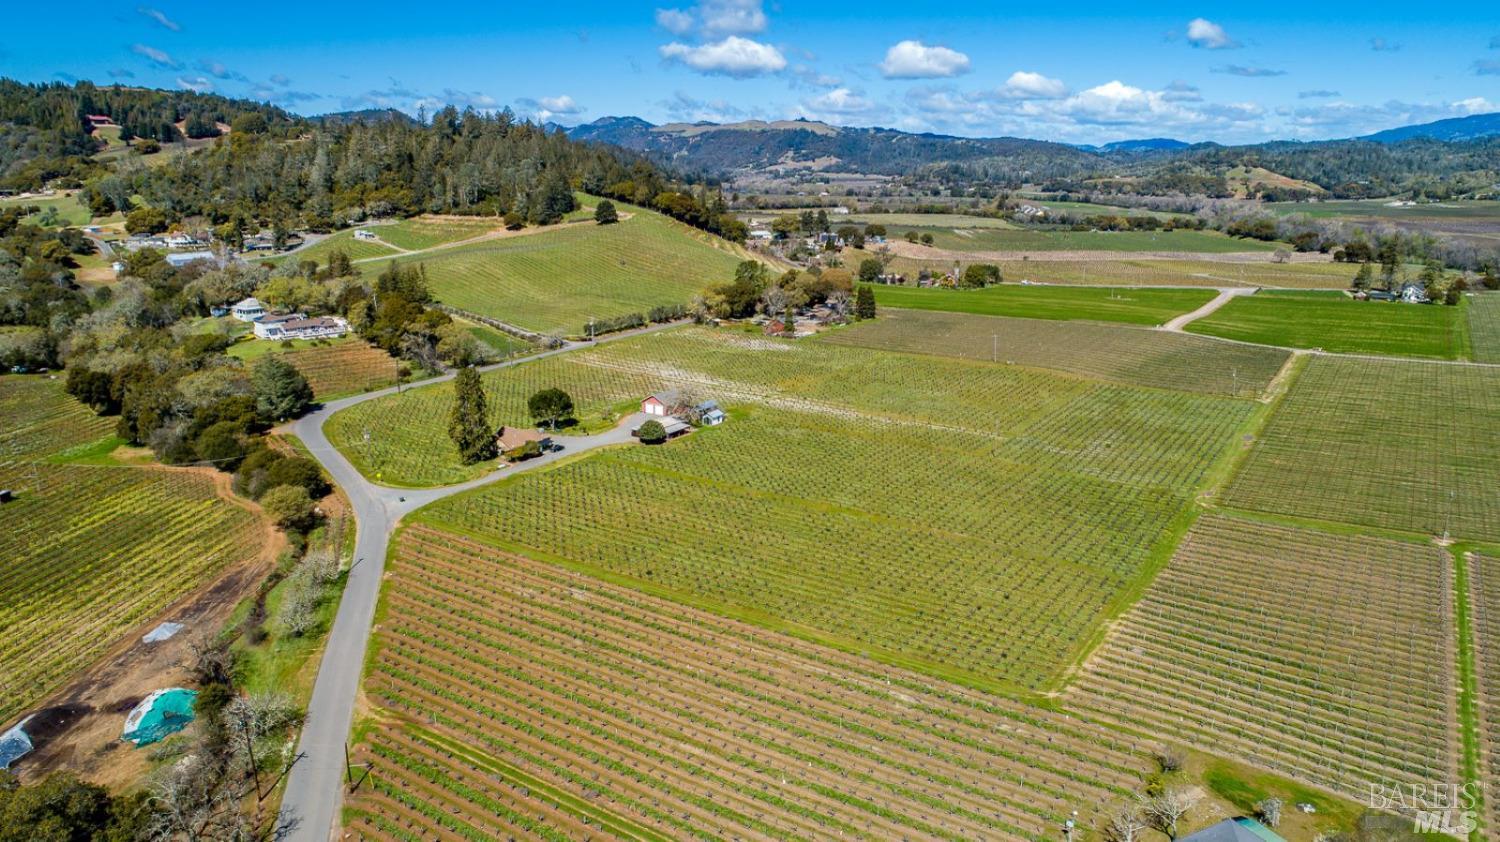 While it feels refreshingly isolated from the hustle and bustle of modern society, Dry Creek Valley is conveniently close to Hwy. 101 and only a short distance from the Sonoma County Airport and Santa Rosa. It is also less than an hour and a half north of San Francisco.